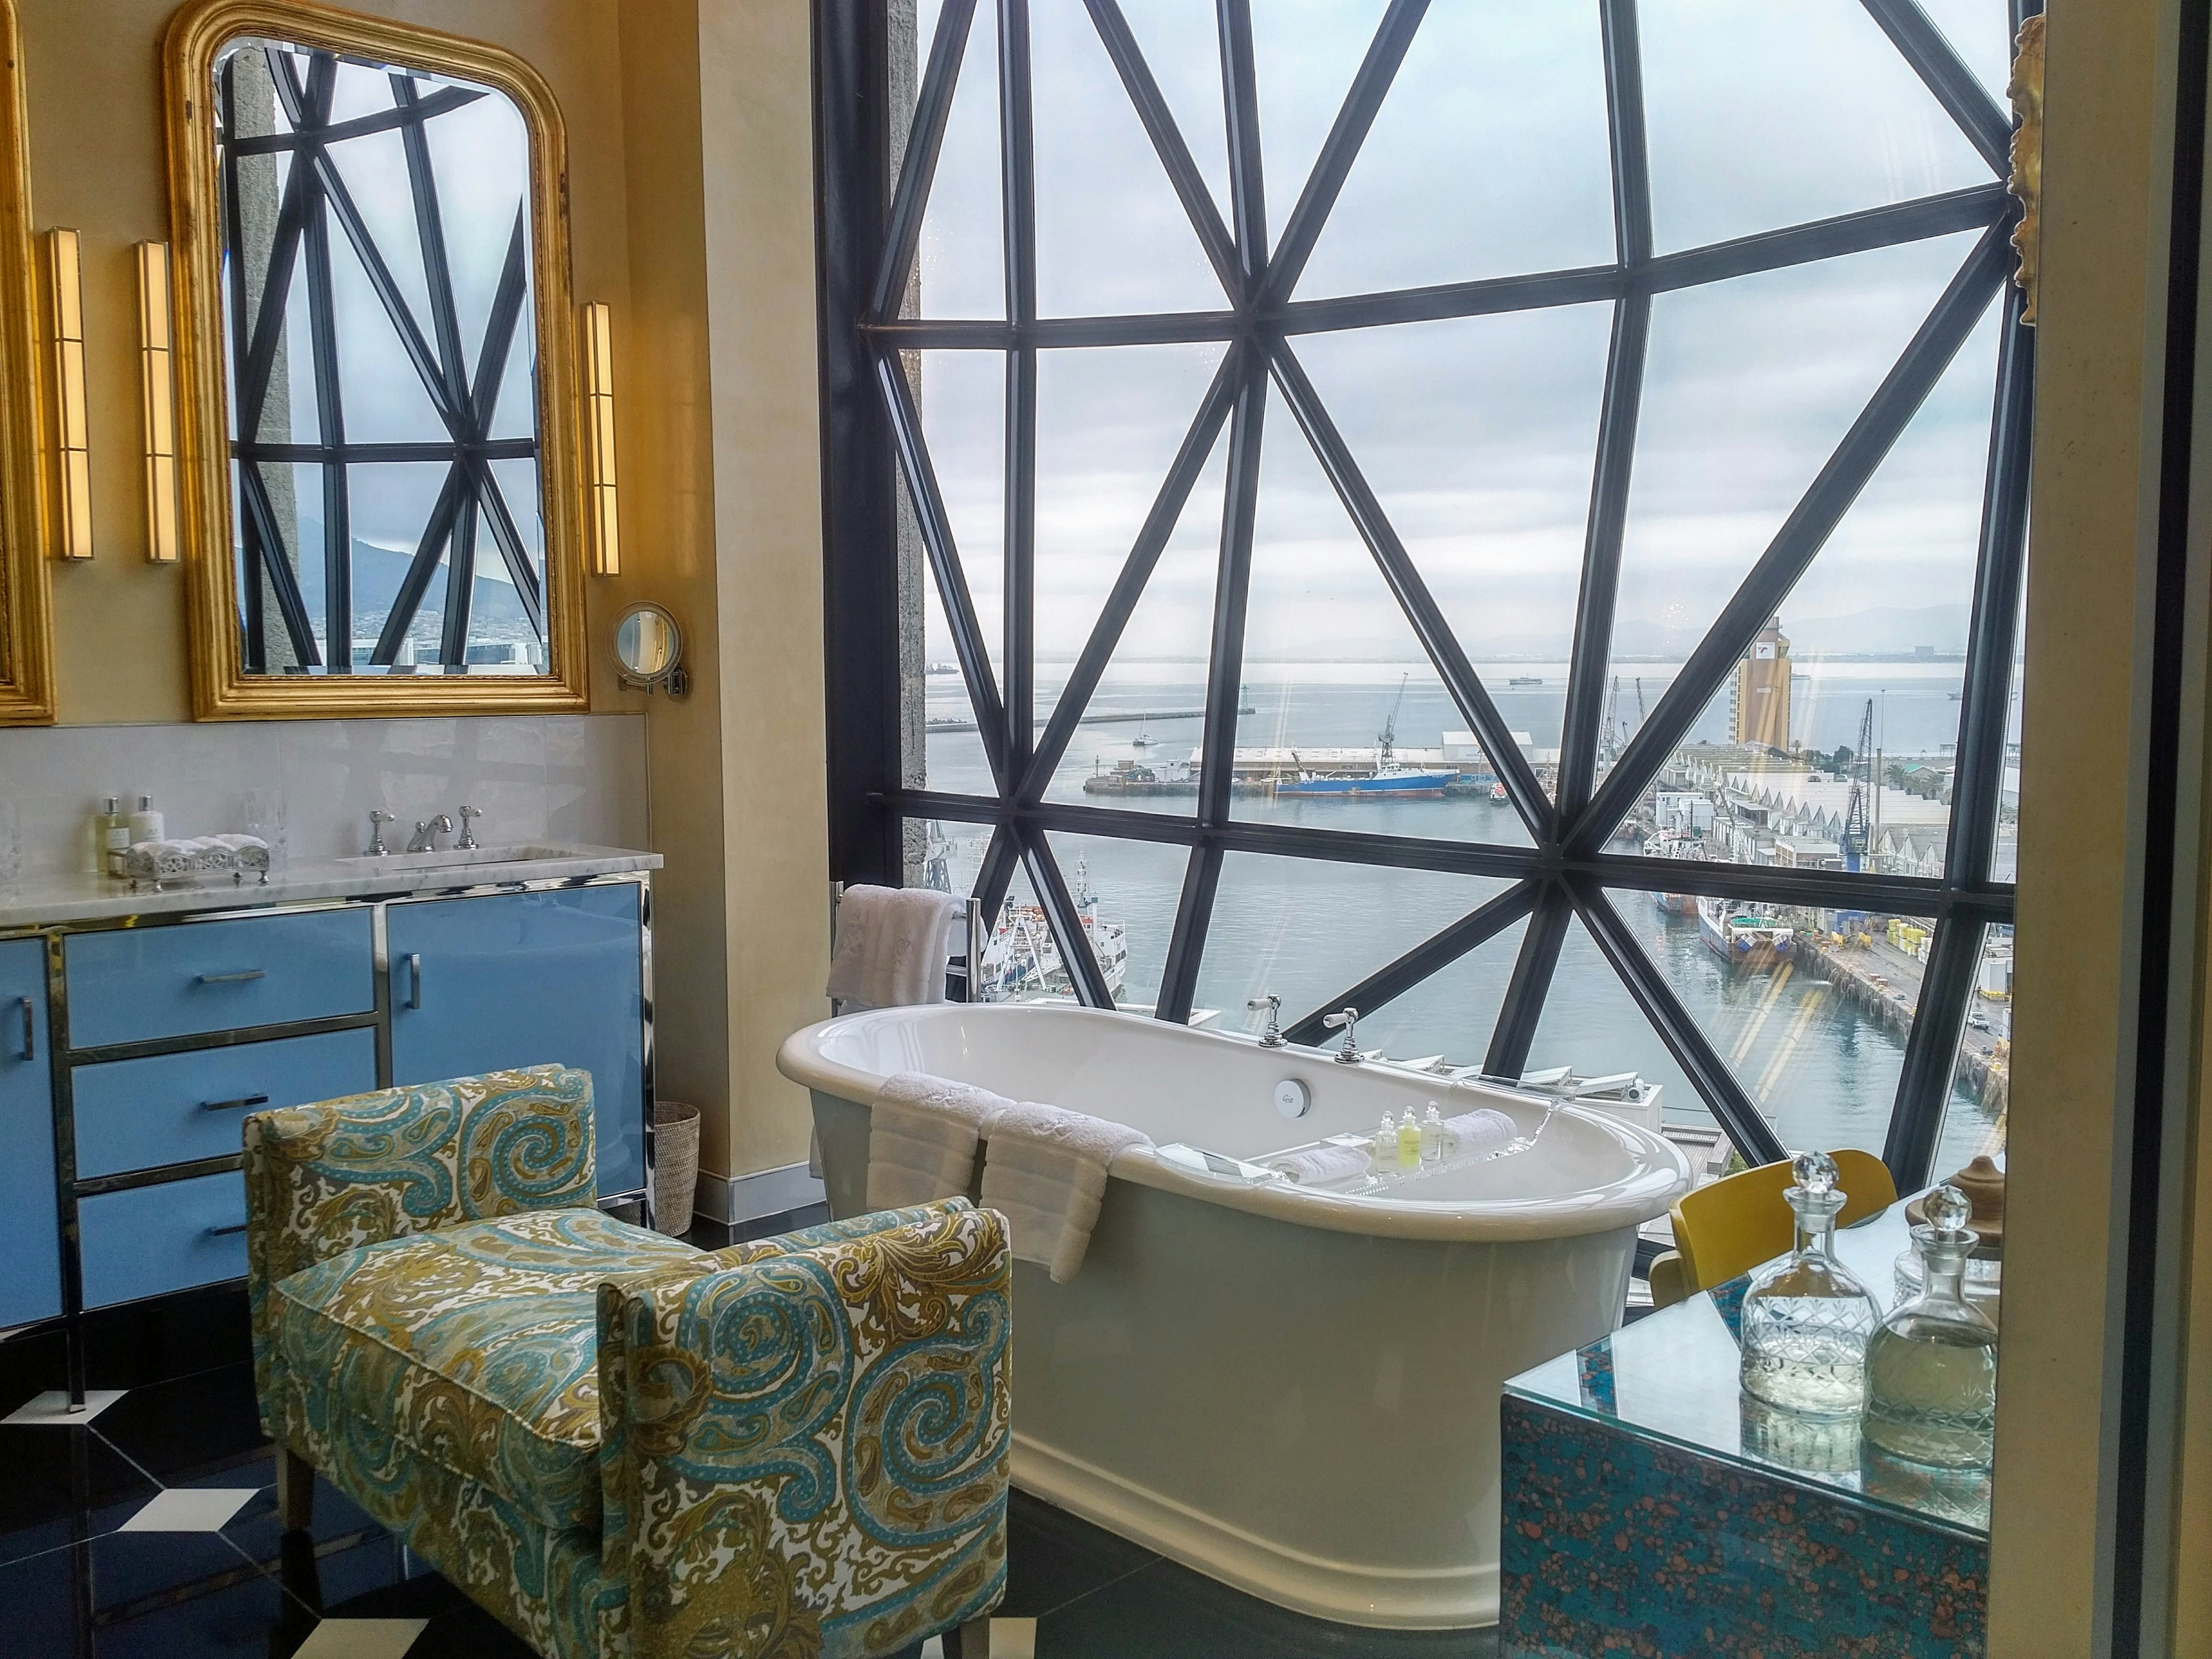 A white, vintage-style cast iron and porcelain soaking tub sits in front of an enormous window broken up into bold, geometric triangular panes. Parallell to the tub is a green and blue paisley Empire settee. Gold mirrors to the left reflect the window over a blue cabinet with a sink. In the foreground to the right are two crystal decanters filled with a pale liquid.